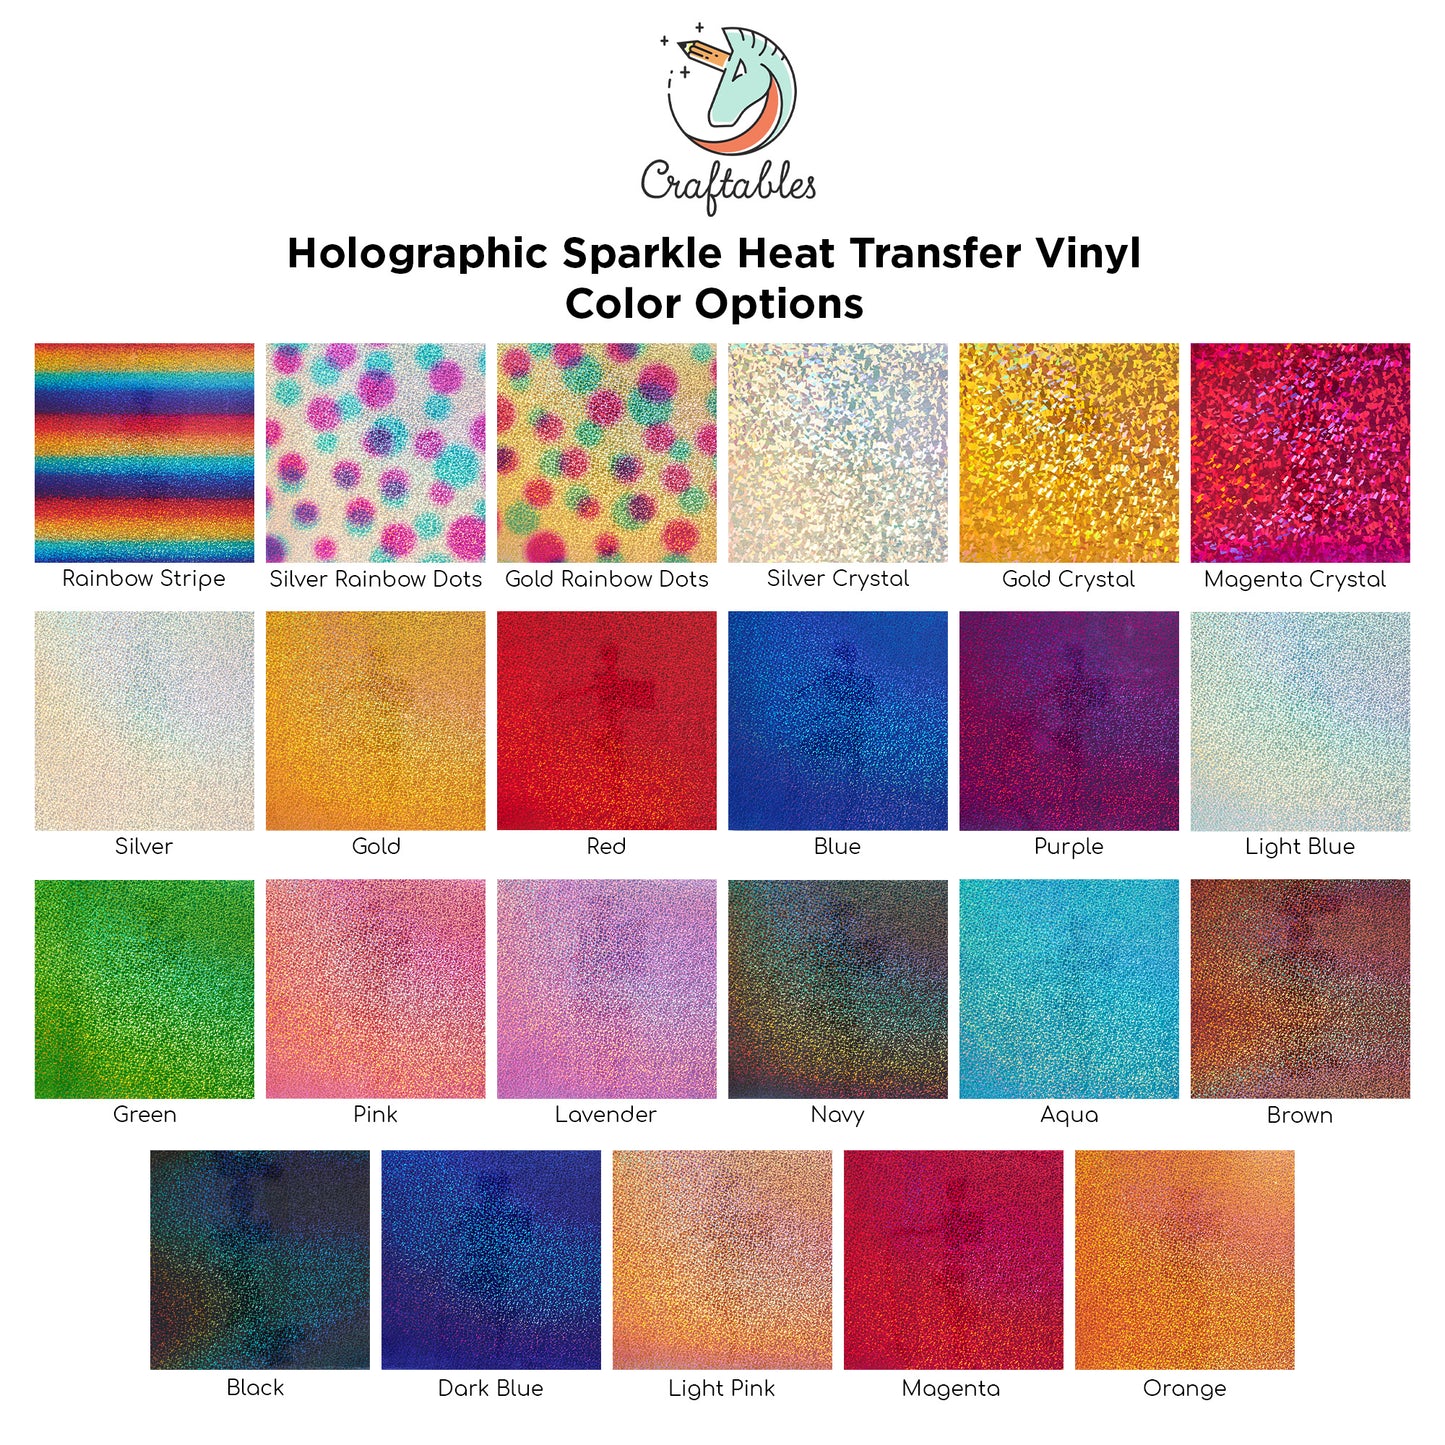 Aqua Holographic Sparkle Heat Transfer Vinyl Sheets By Craftables